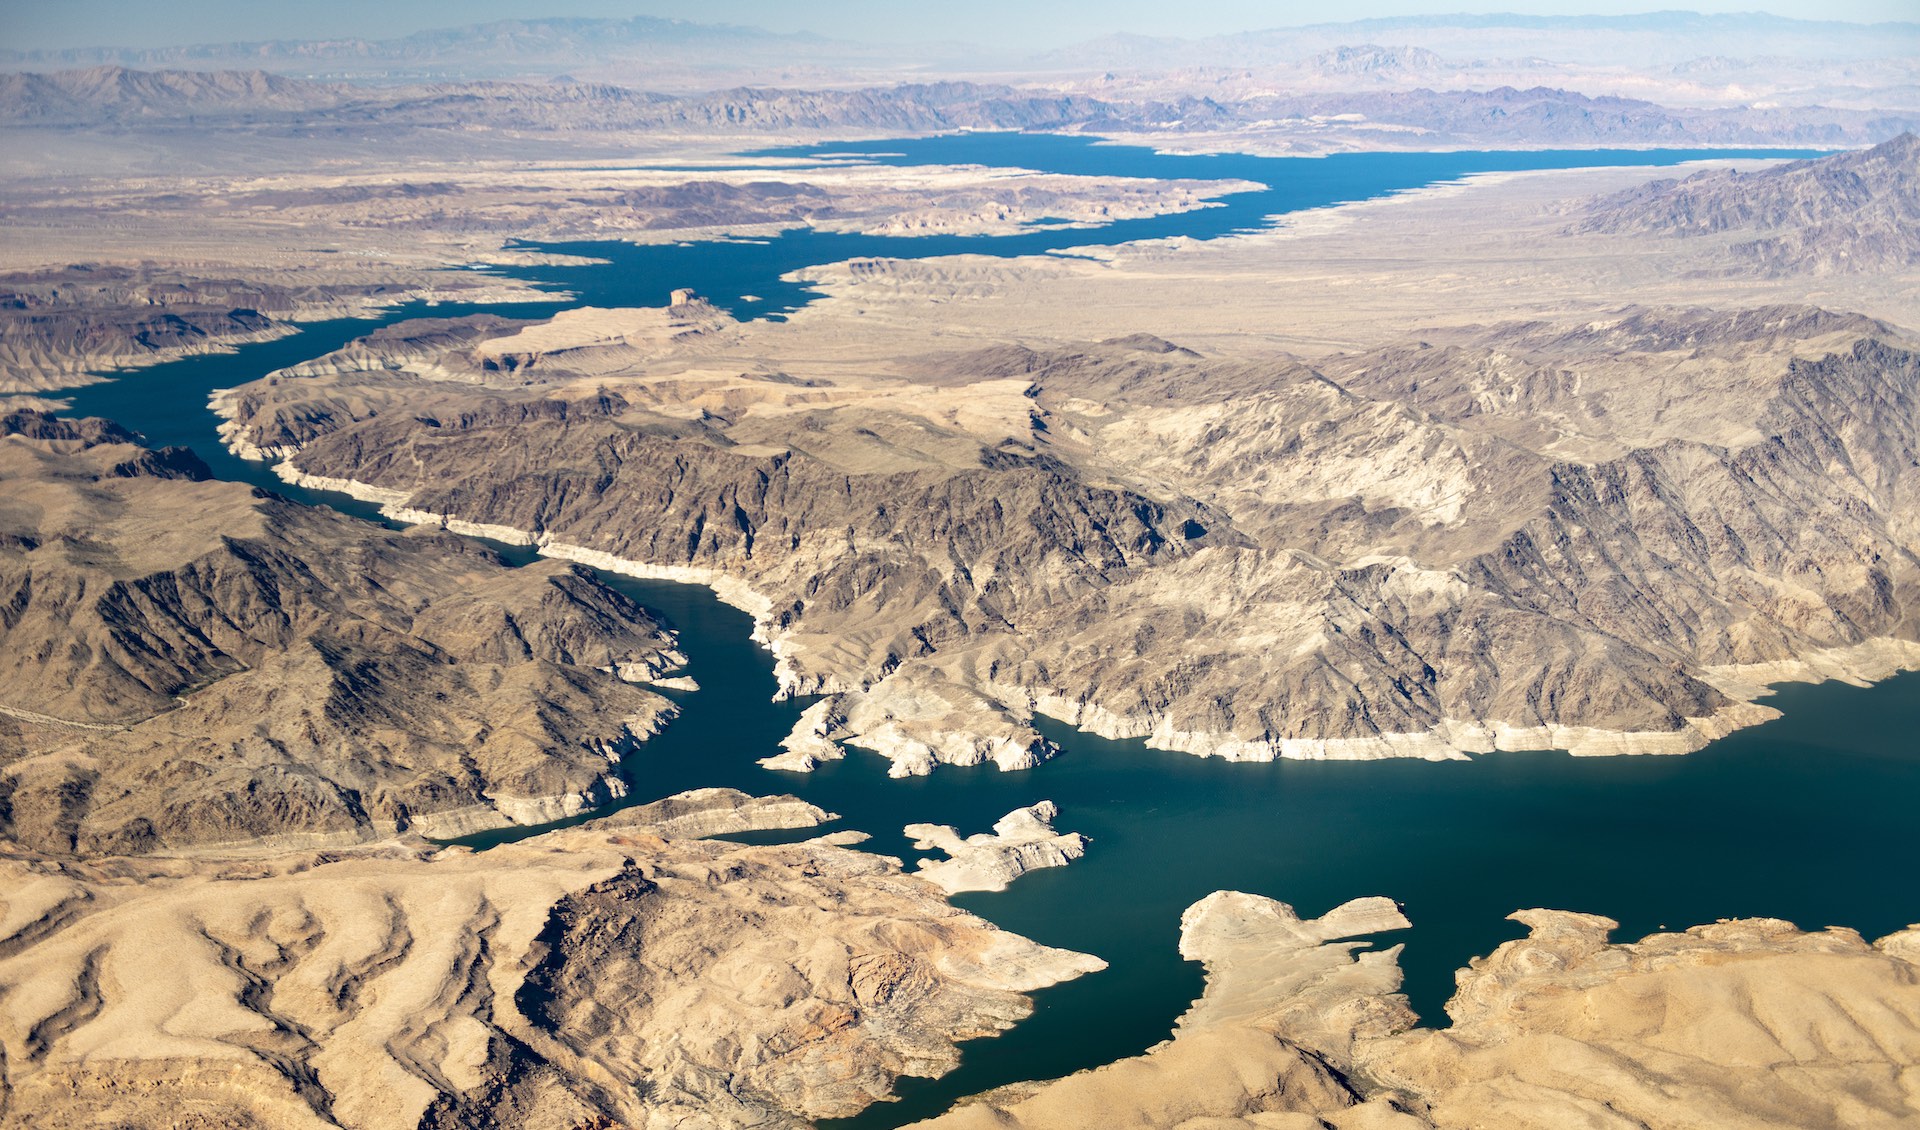 Lake Mead and the rest of the Colorado River system are shrinking rapidly. The U.S. Bureau of Reclamation has called for new conservation measures, asking states to conserve a tremendously large amount of water, and giving them a 60-day timeline to formulate a plan for those reductions.